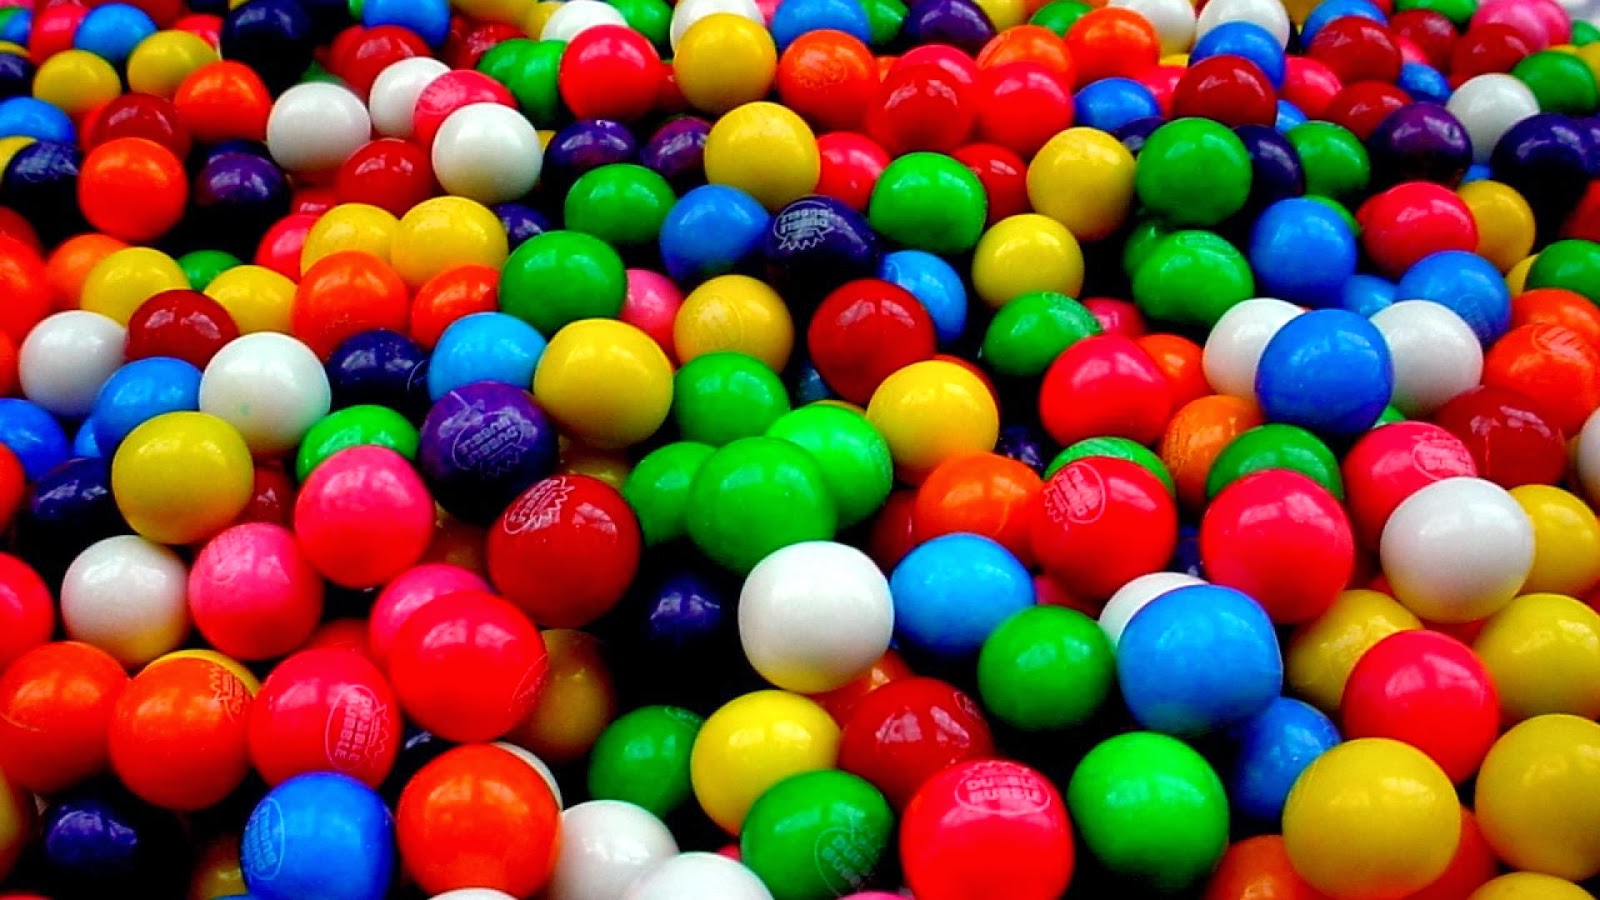 Candy HD Wallpaper Colorful Candies Image